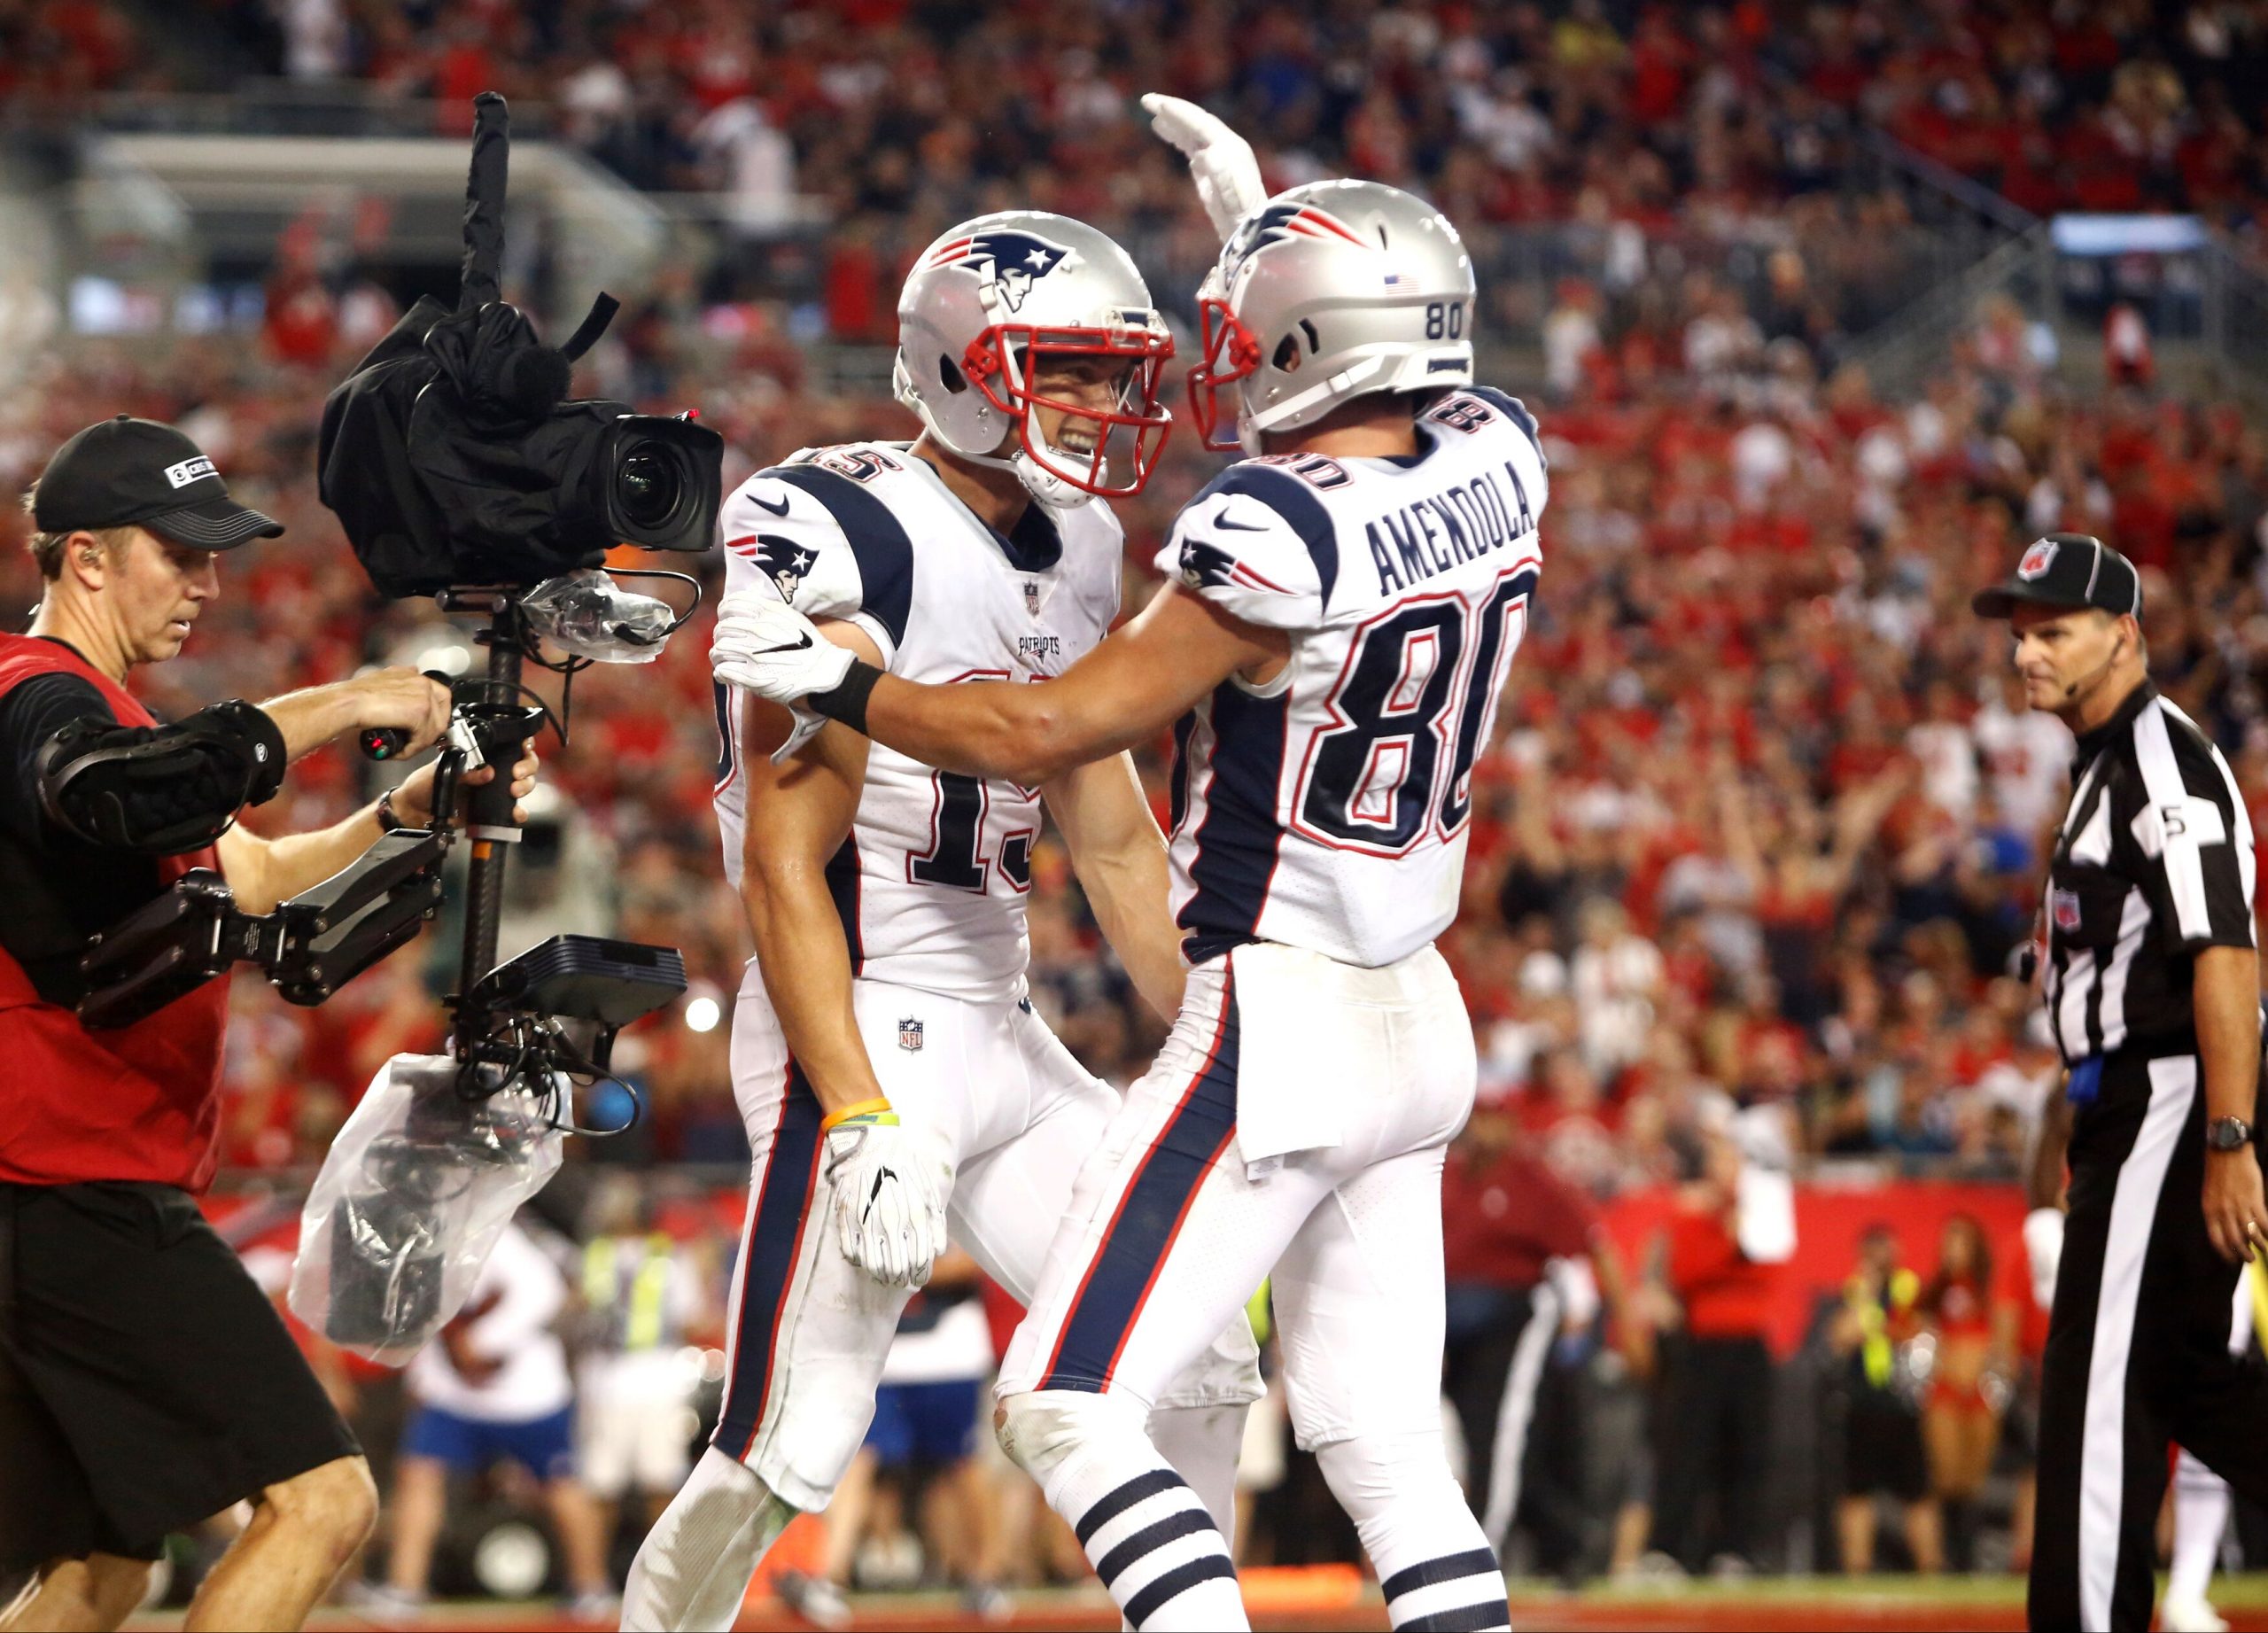 New England Patriots: Super Bowl champs win ugly in Tampa Bay